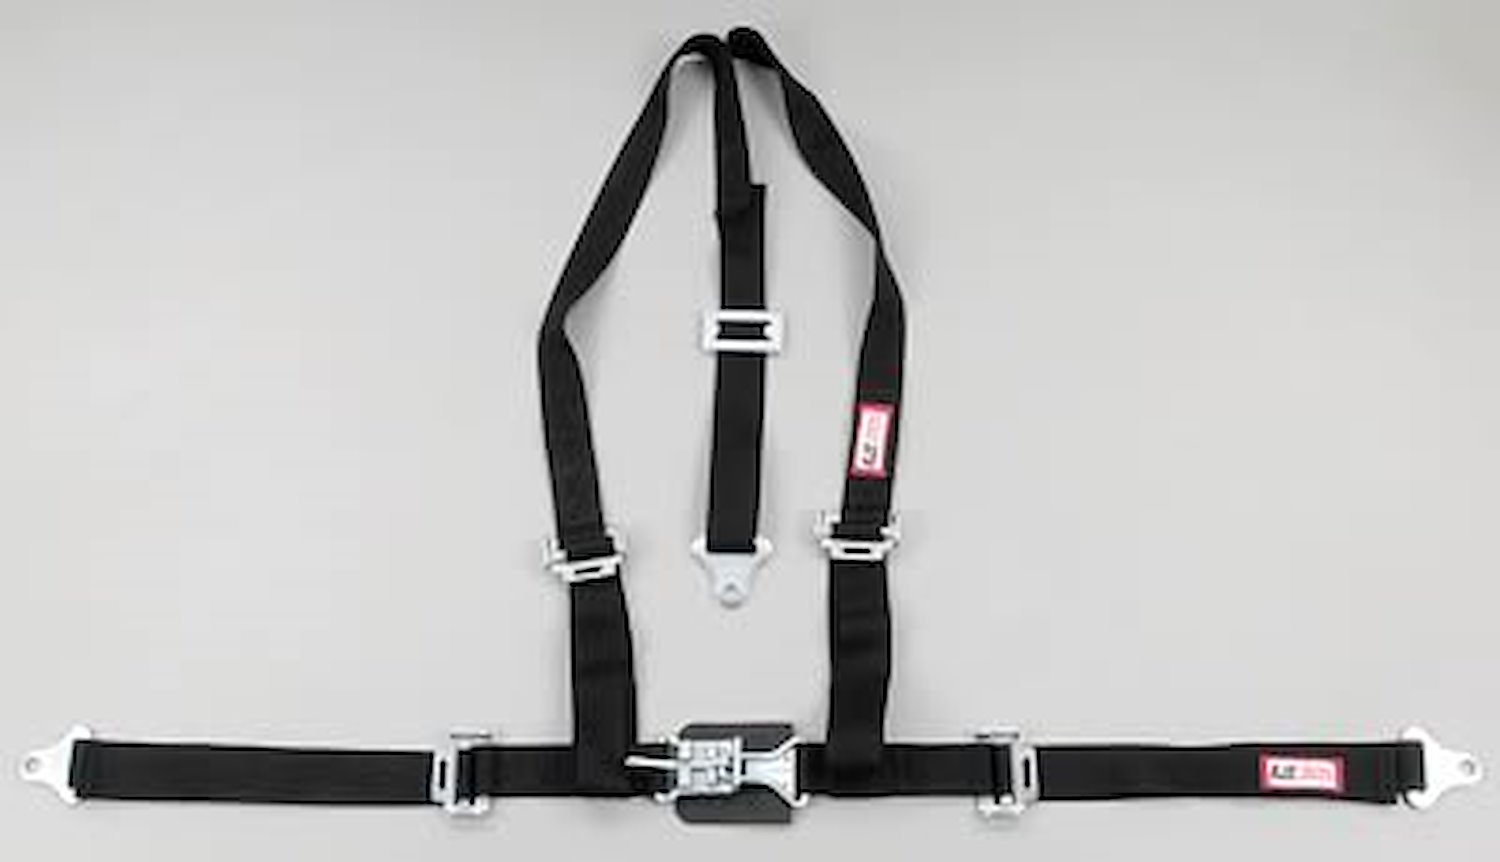 NON-SFI L&L HARNESS 2 PULL DOWN Lap Belt SEWN IN 2 S.H. V ROLL BAR Mount ALL BOLT ENDS RED